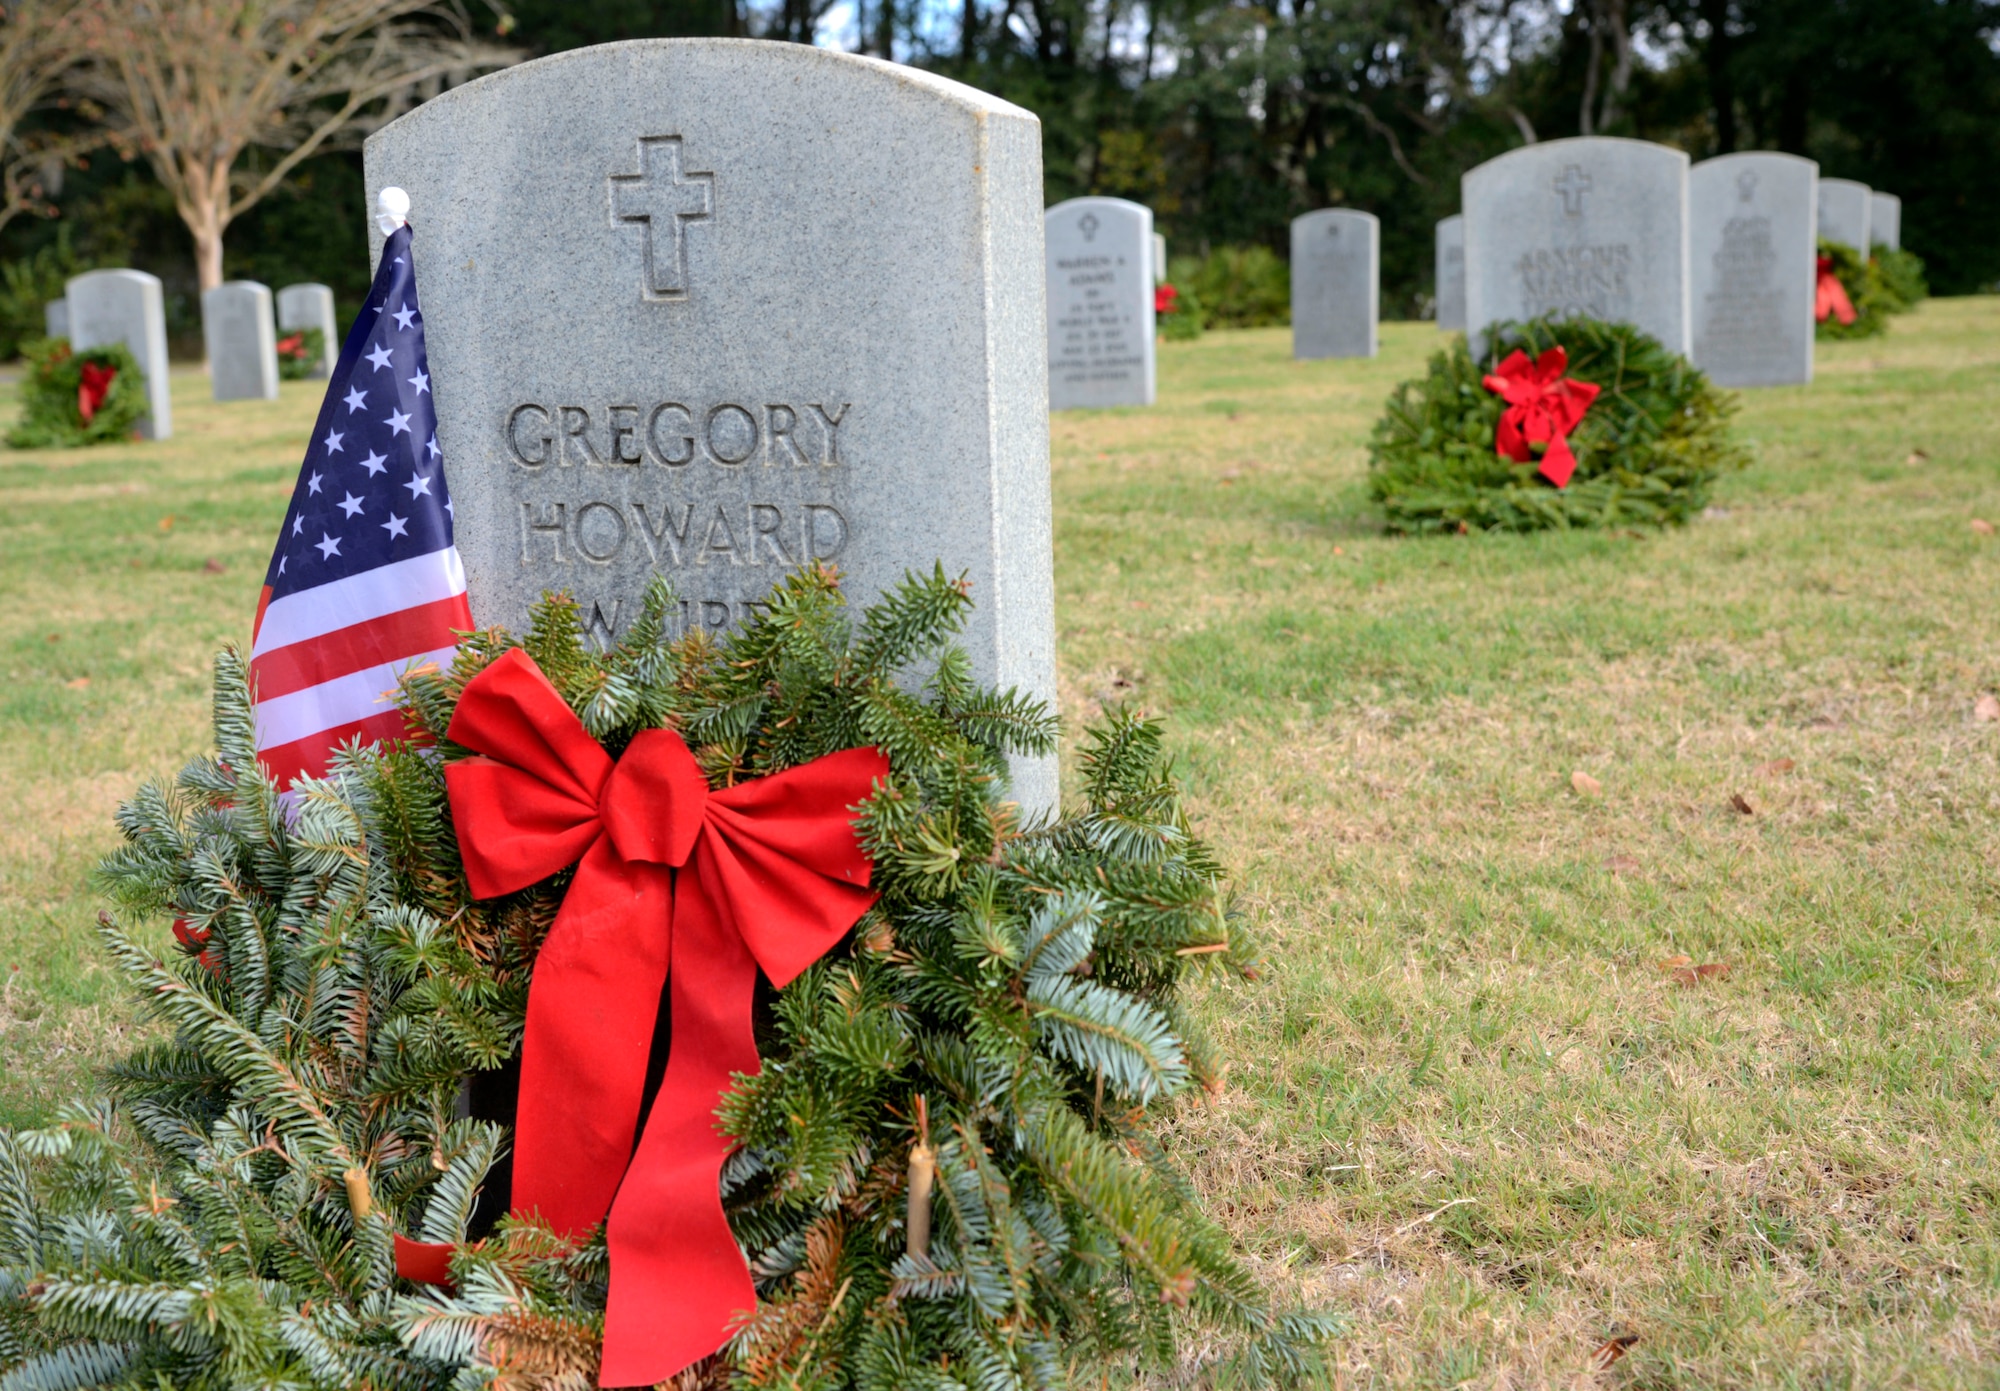 A wreath and American flag lie at the grave of Army Sgt. Gregory Waibel, Vietnam veteran, at Florida National Cemetery in Bushnell, Fla., Dec. 17, 2016. Wreaths Across America honors the men and women who served by placing wreaths at cemeteries worldwide every year. (U.S. Air Force photo by Senior Airman Tori Schultz)